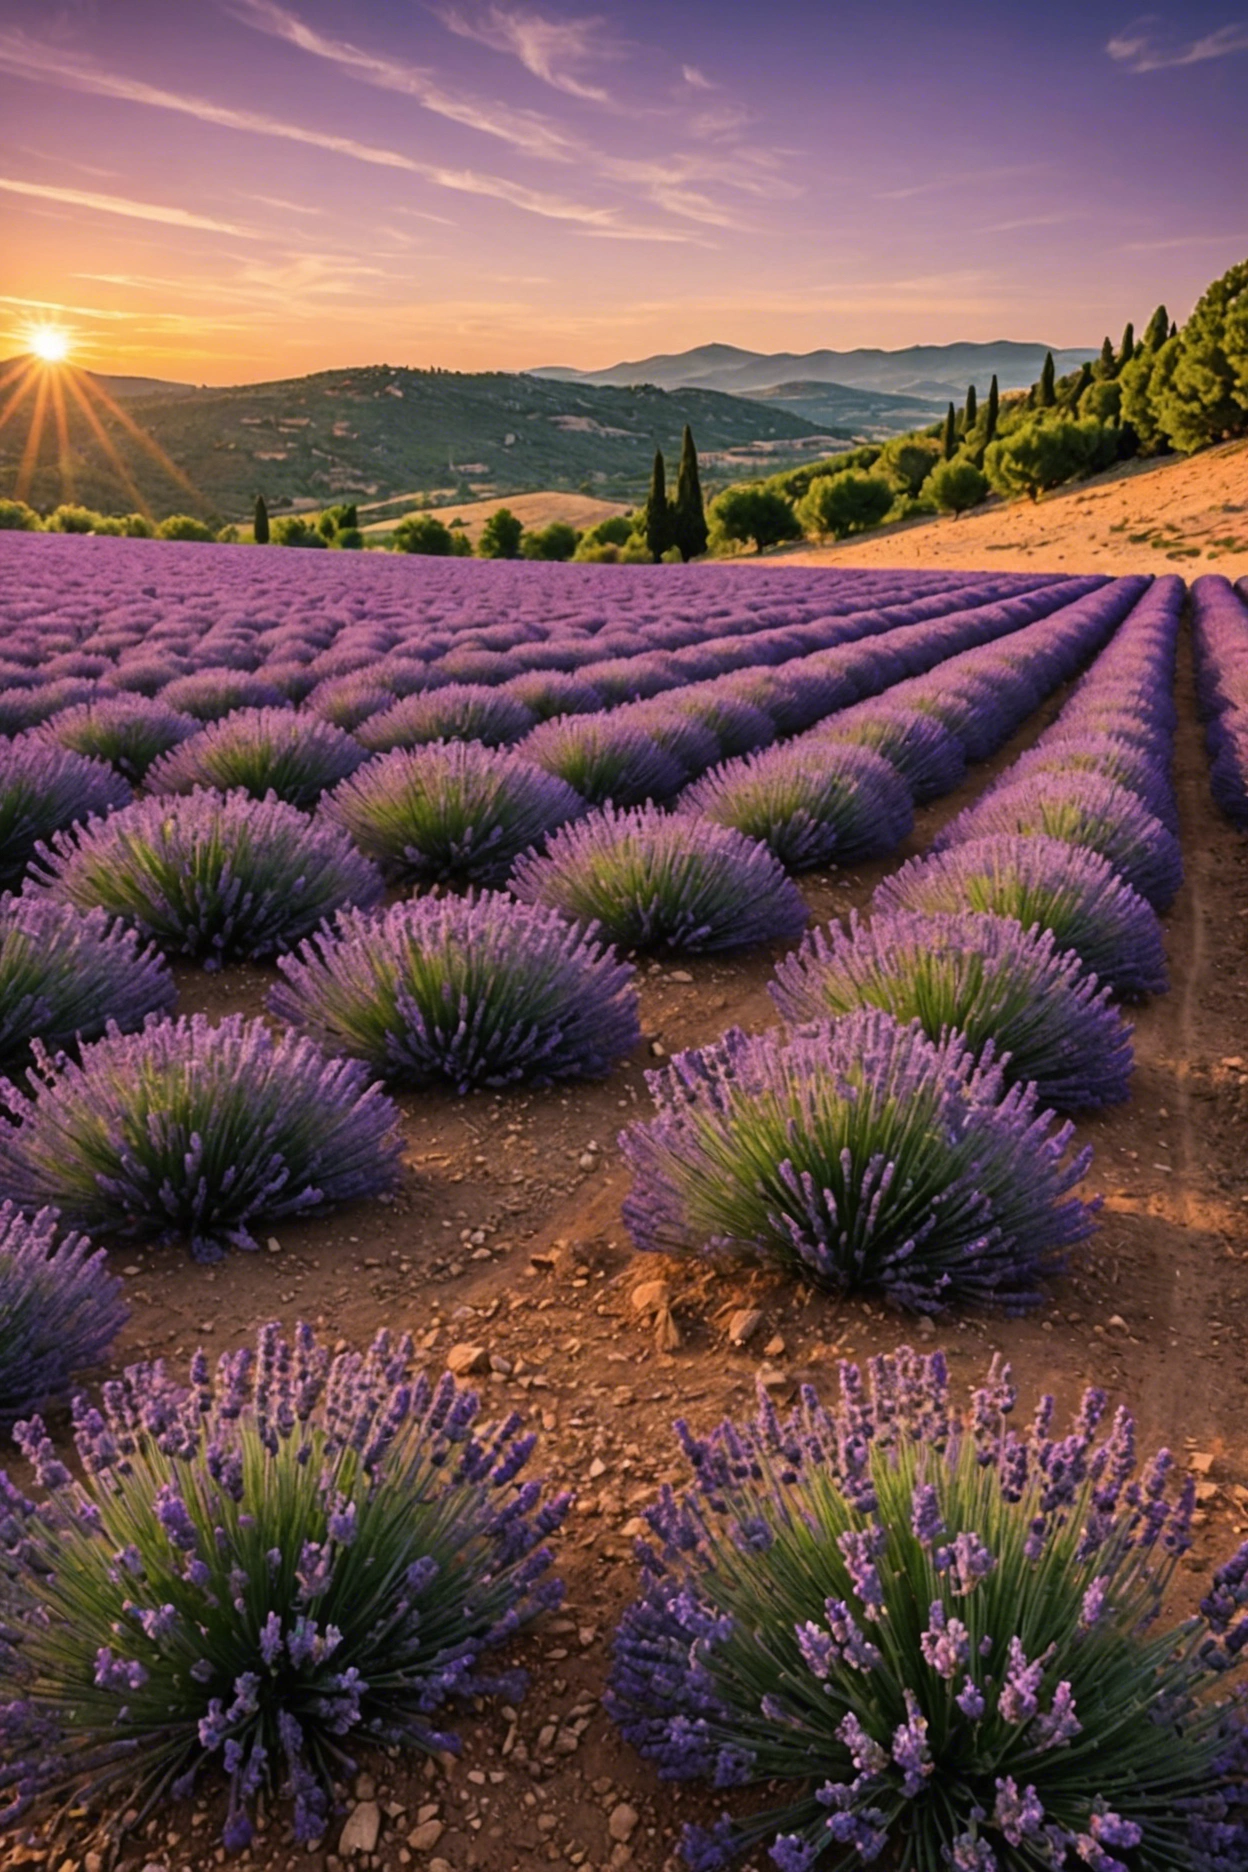 "Sunset over a vast field of vibrant purple lavender thriving in dry, rocky soil amidst rolling hills."